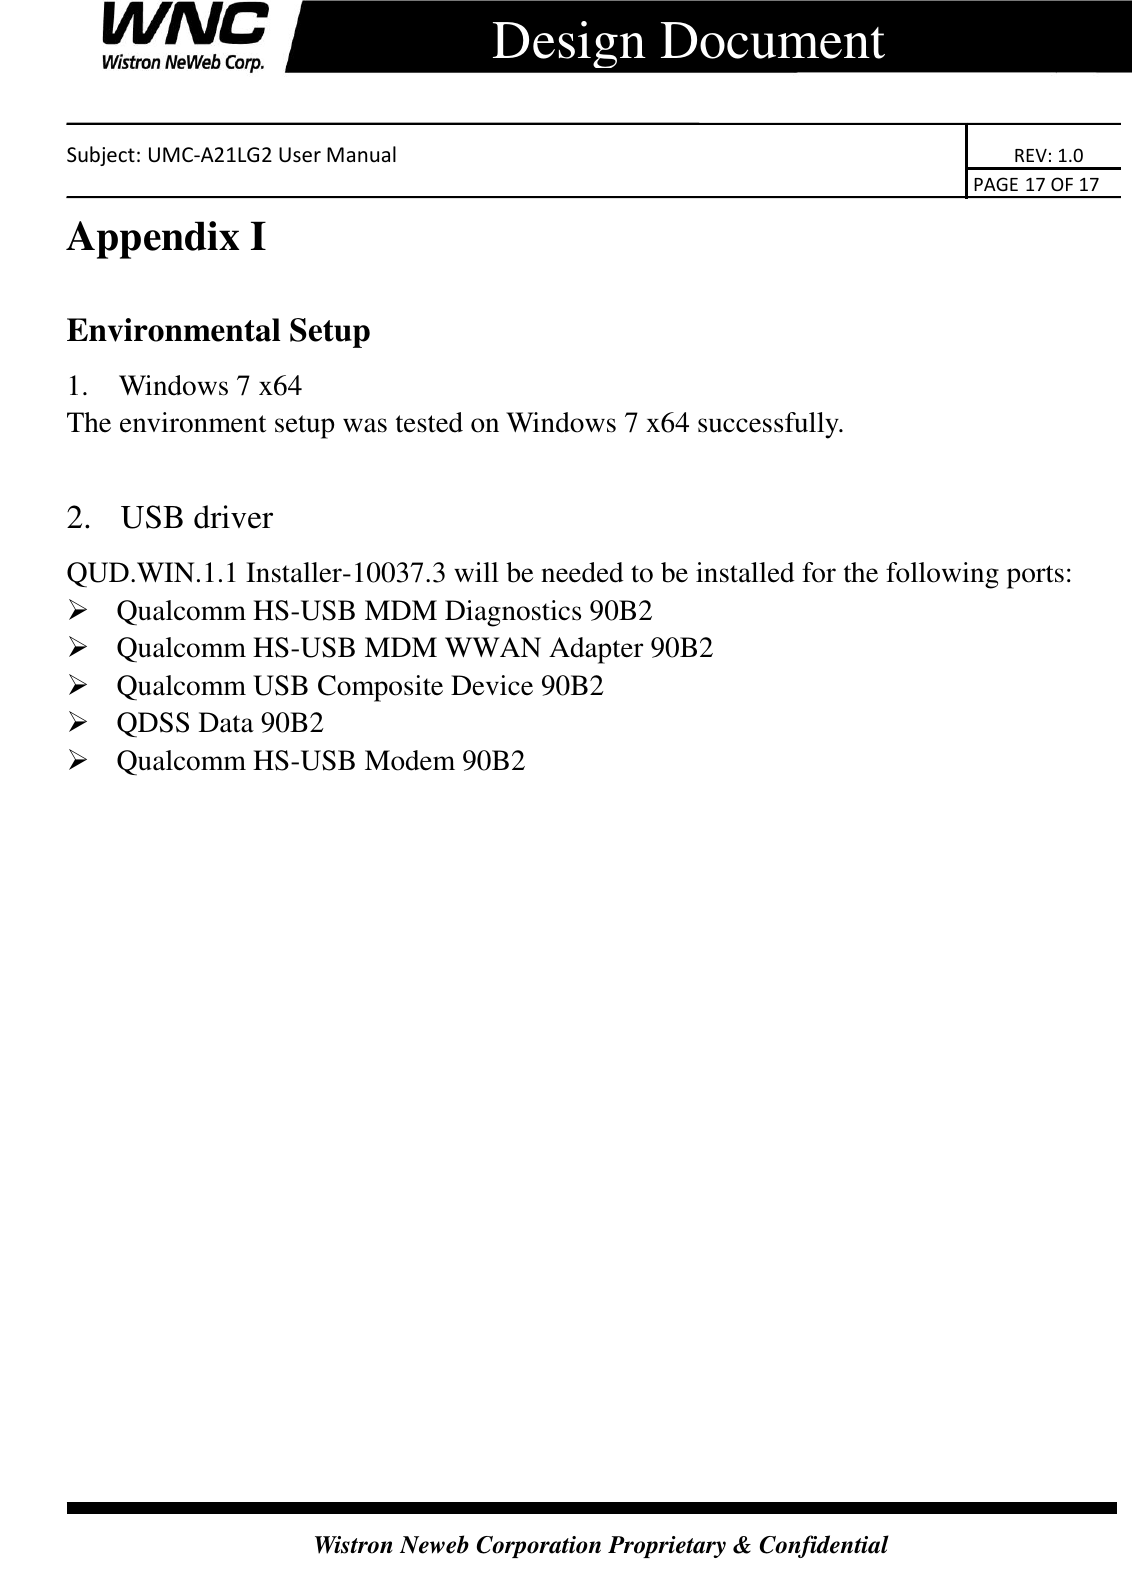    Subject: UMC-A21LG2 User Manual                                                                      REV: 1.0                                                                                        PAGE 17 OF 17  Wistron Neweb Corporation Proprietary &amp; Confidential      Design Document Appendix I Environmental Setup 1.   Windows 7 x64 The environment setup was tested on Windows 7 x64 successfully.  2.   USB driver QUD.WIN.1.1 Installer-10037.3 will be needed to be installed for the following ports:  Qualcomm HS-USB MDM Diagnostics 90B2  Qualcomm HS-USB MDM WWAN Adapter 90B2  Qualcomm USB Composite Device 90B2  QDSS Data 90B2  Qualcomm HS-USB Modem 90B2  